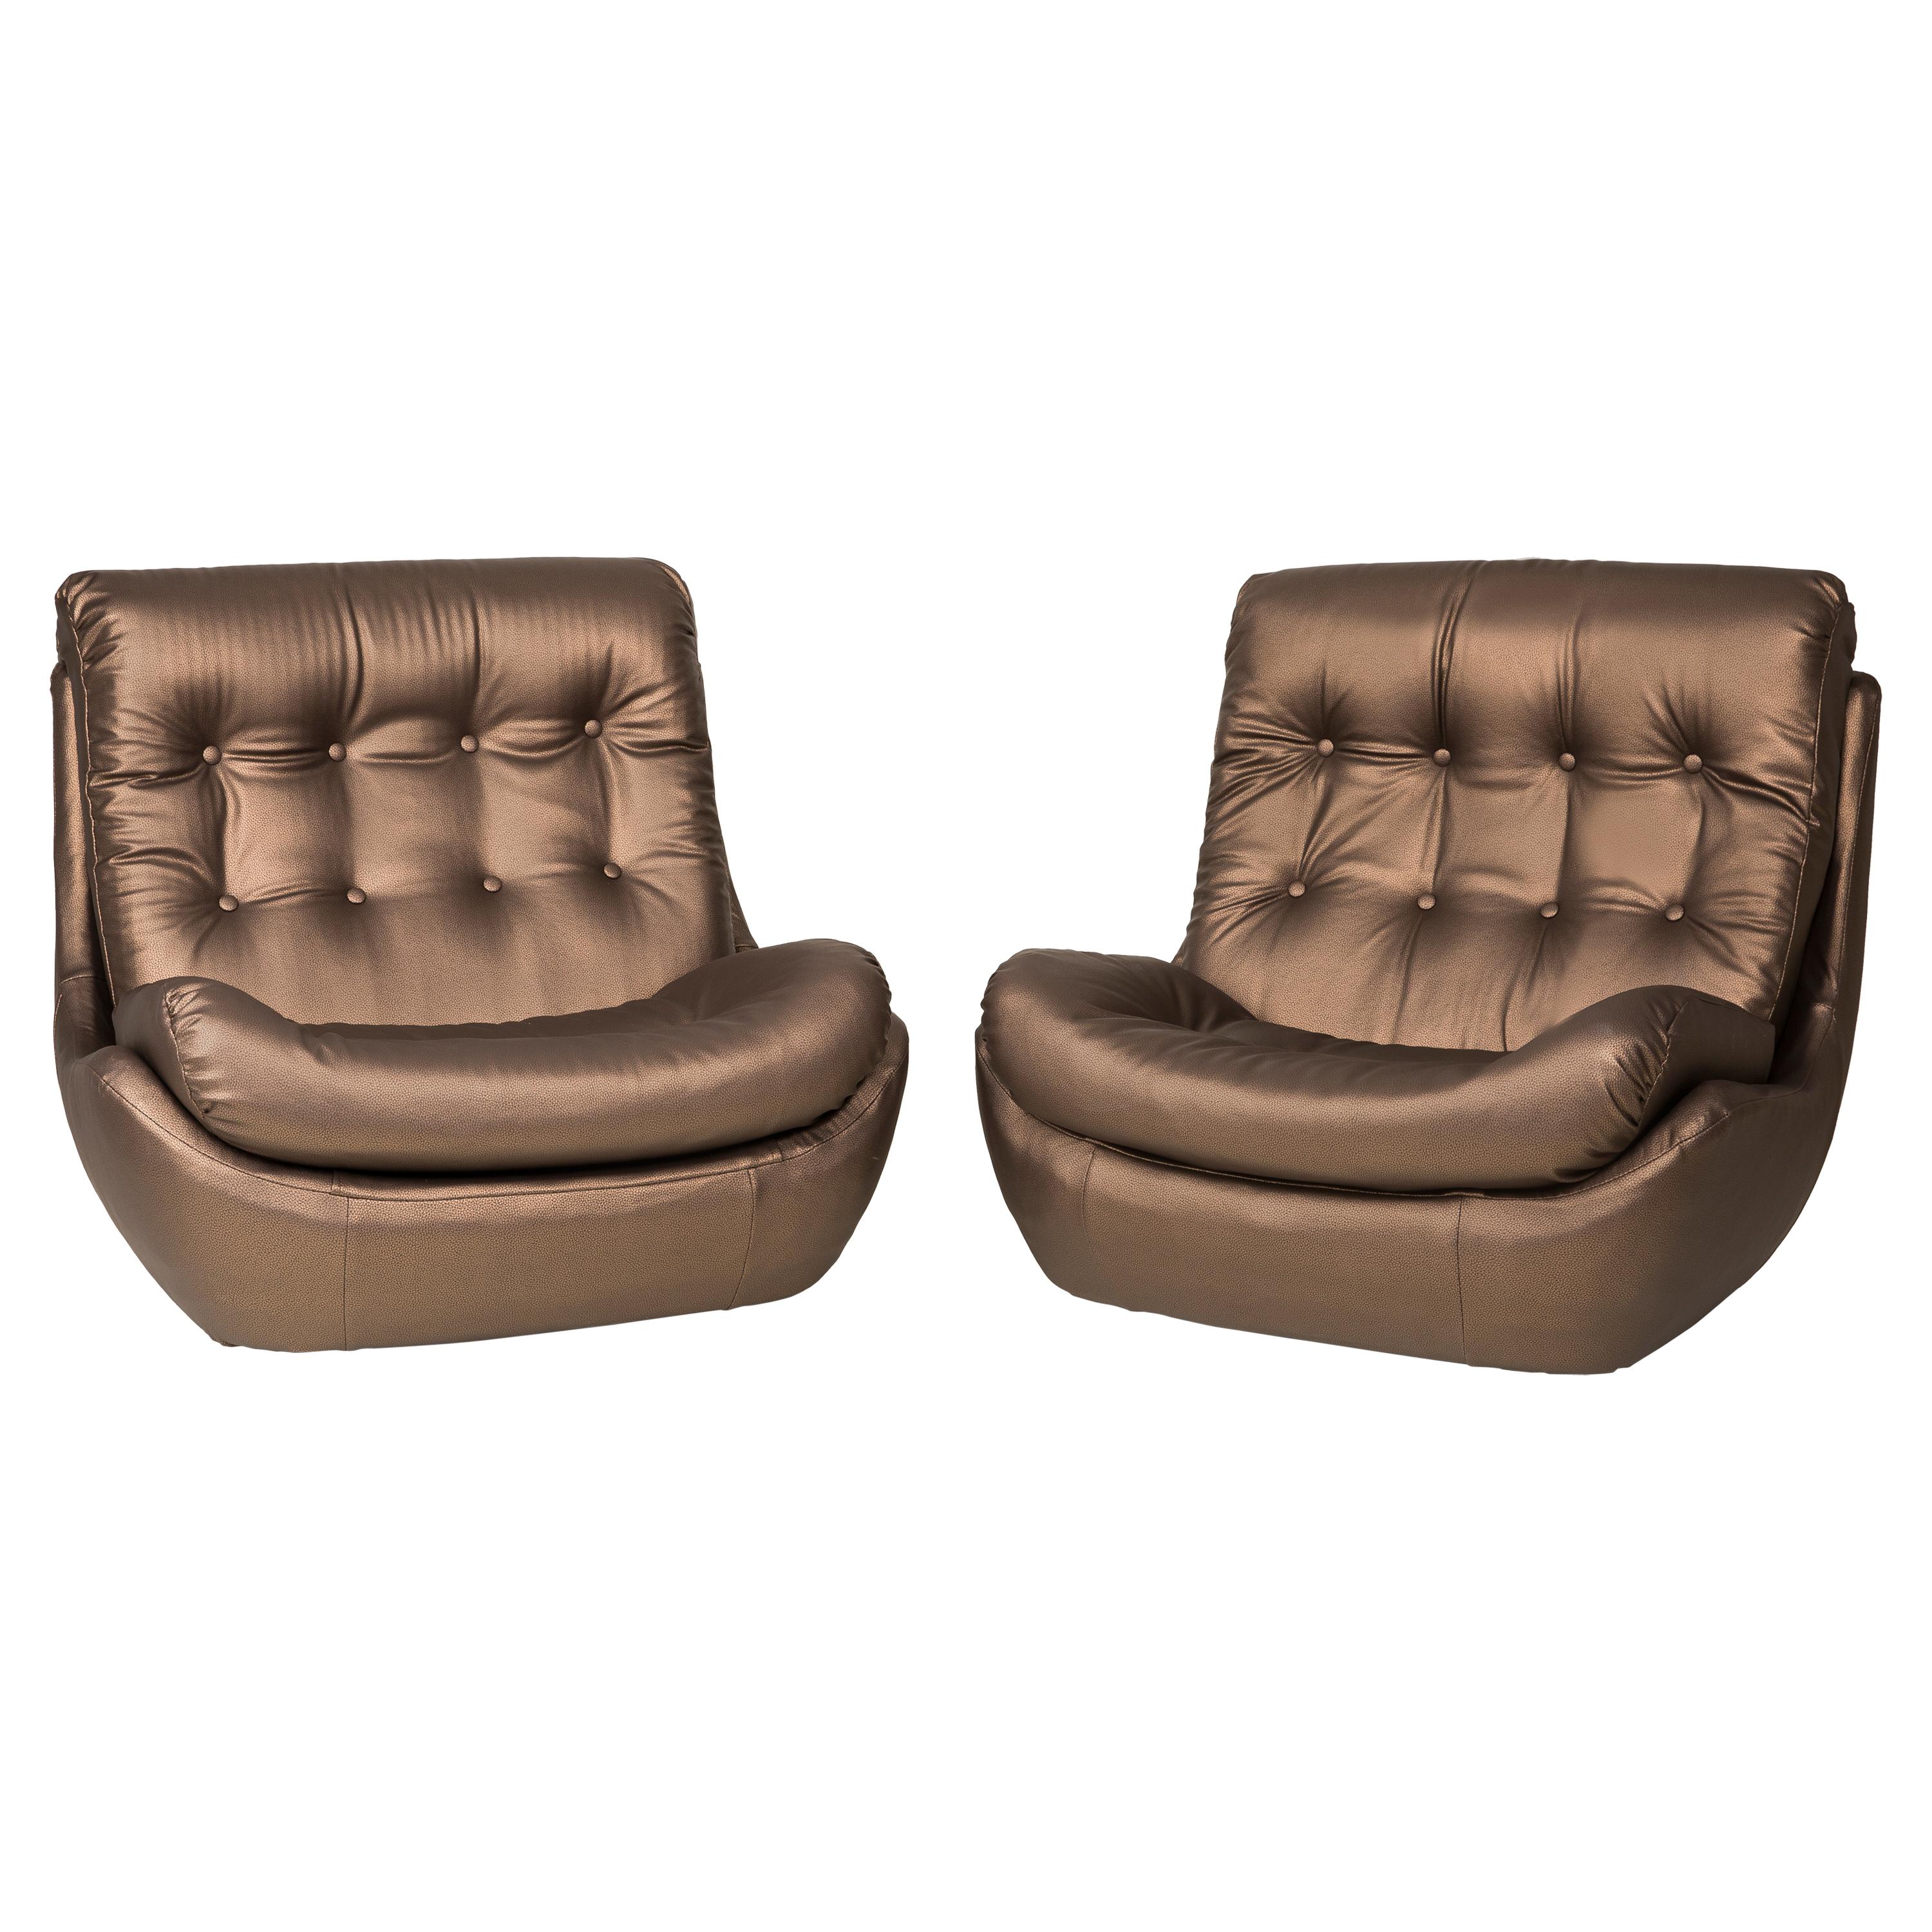 Set of Two 20th Century Vintage Metallic Faux Leather Atlantis Armchairs, 1960s For Sale